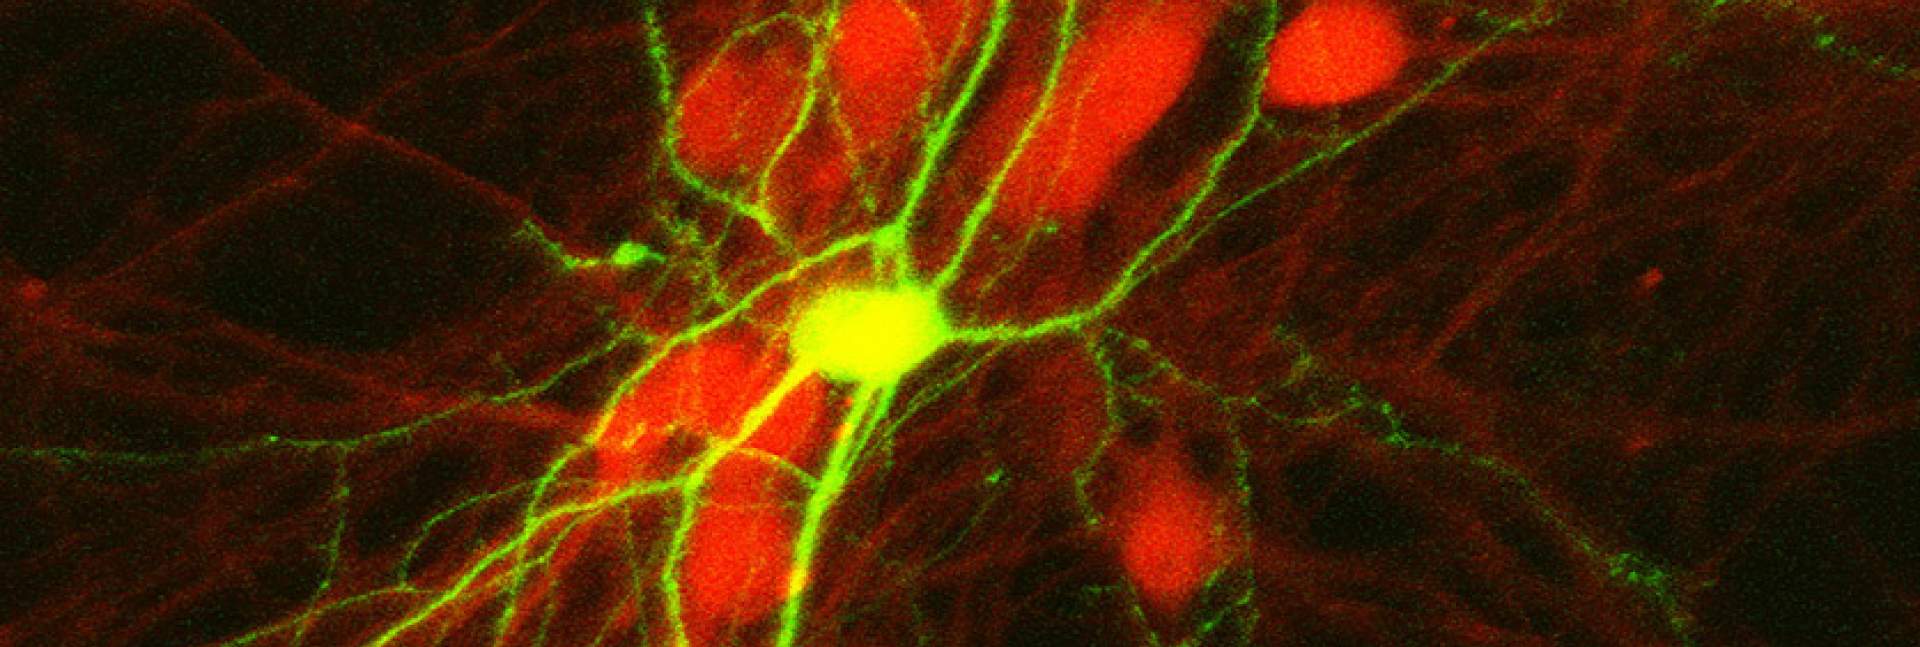 Inhibitory mouse neurons – viewed under a microscope